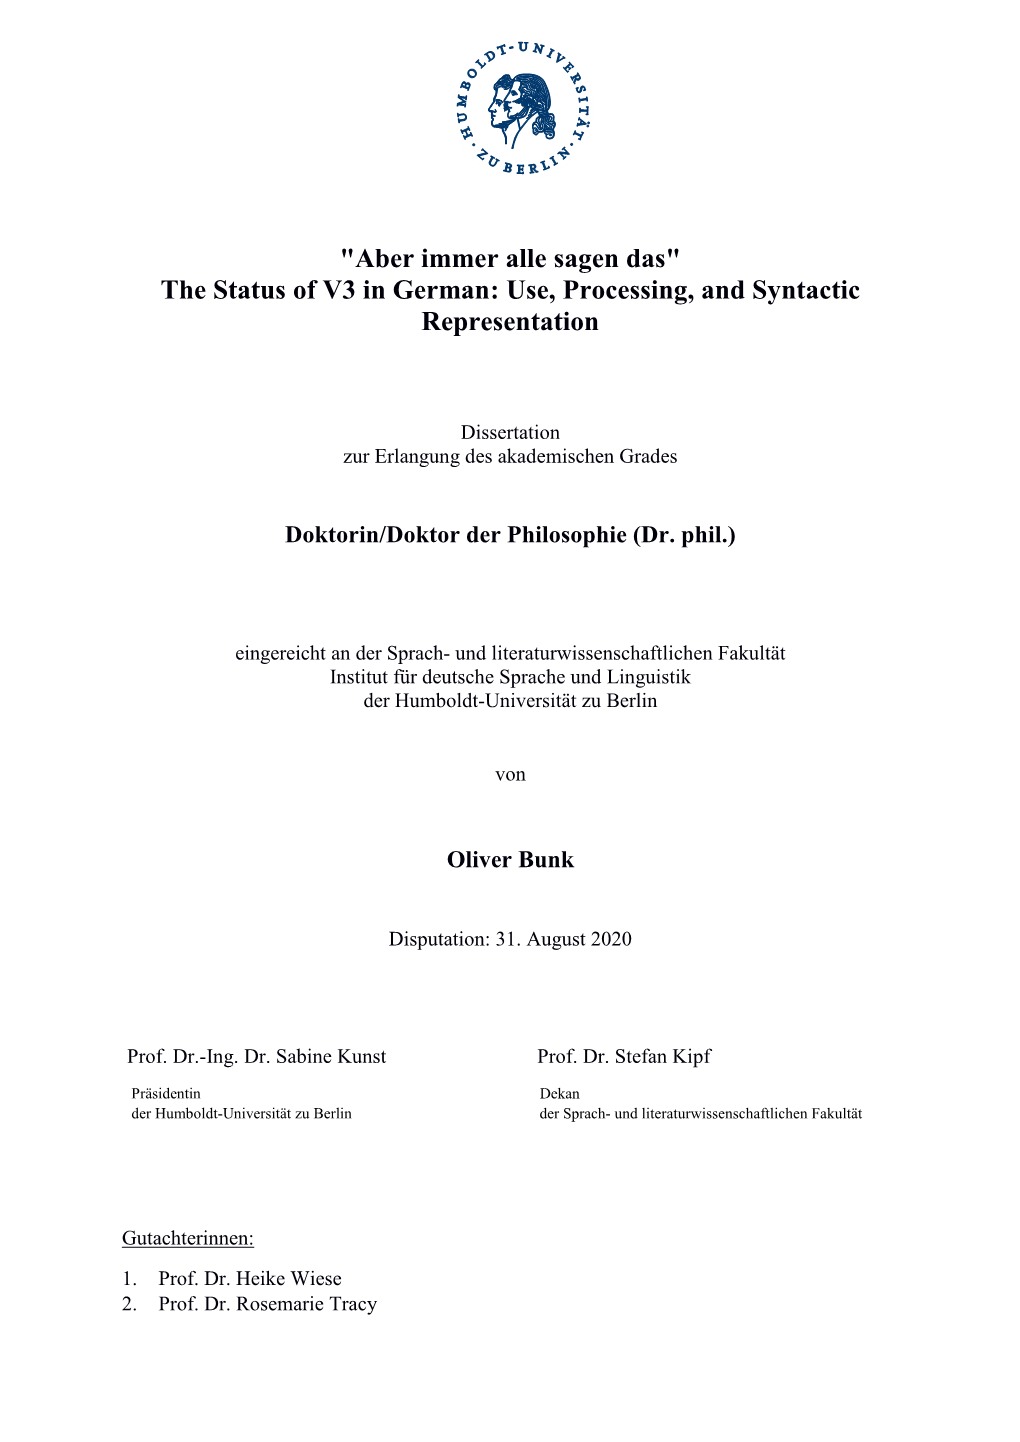 The Status of V3 in German: Use, Processing, and Syntactic Representation